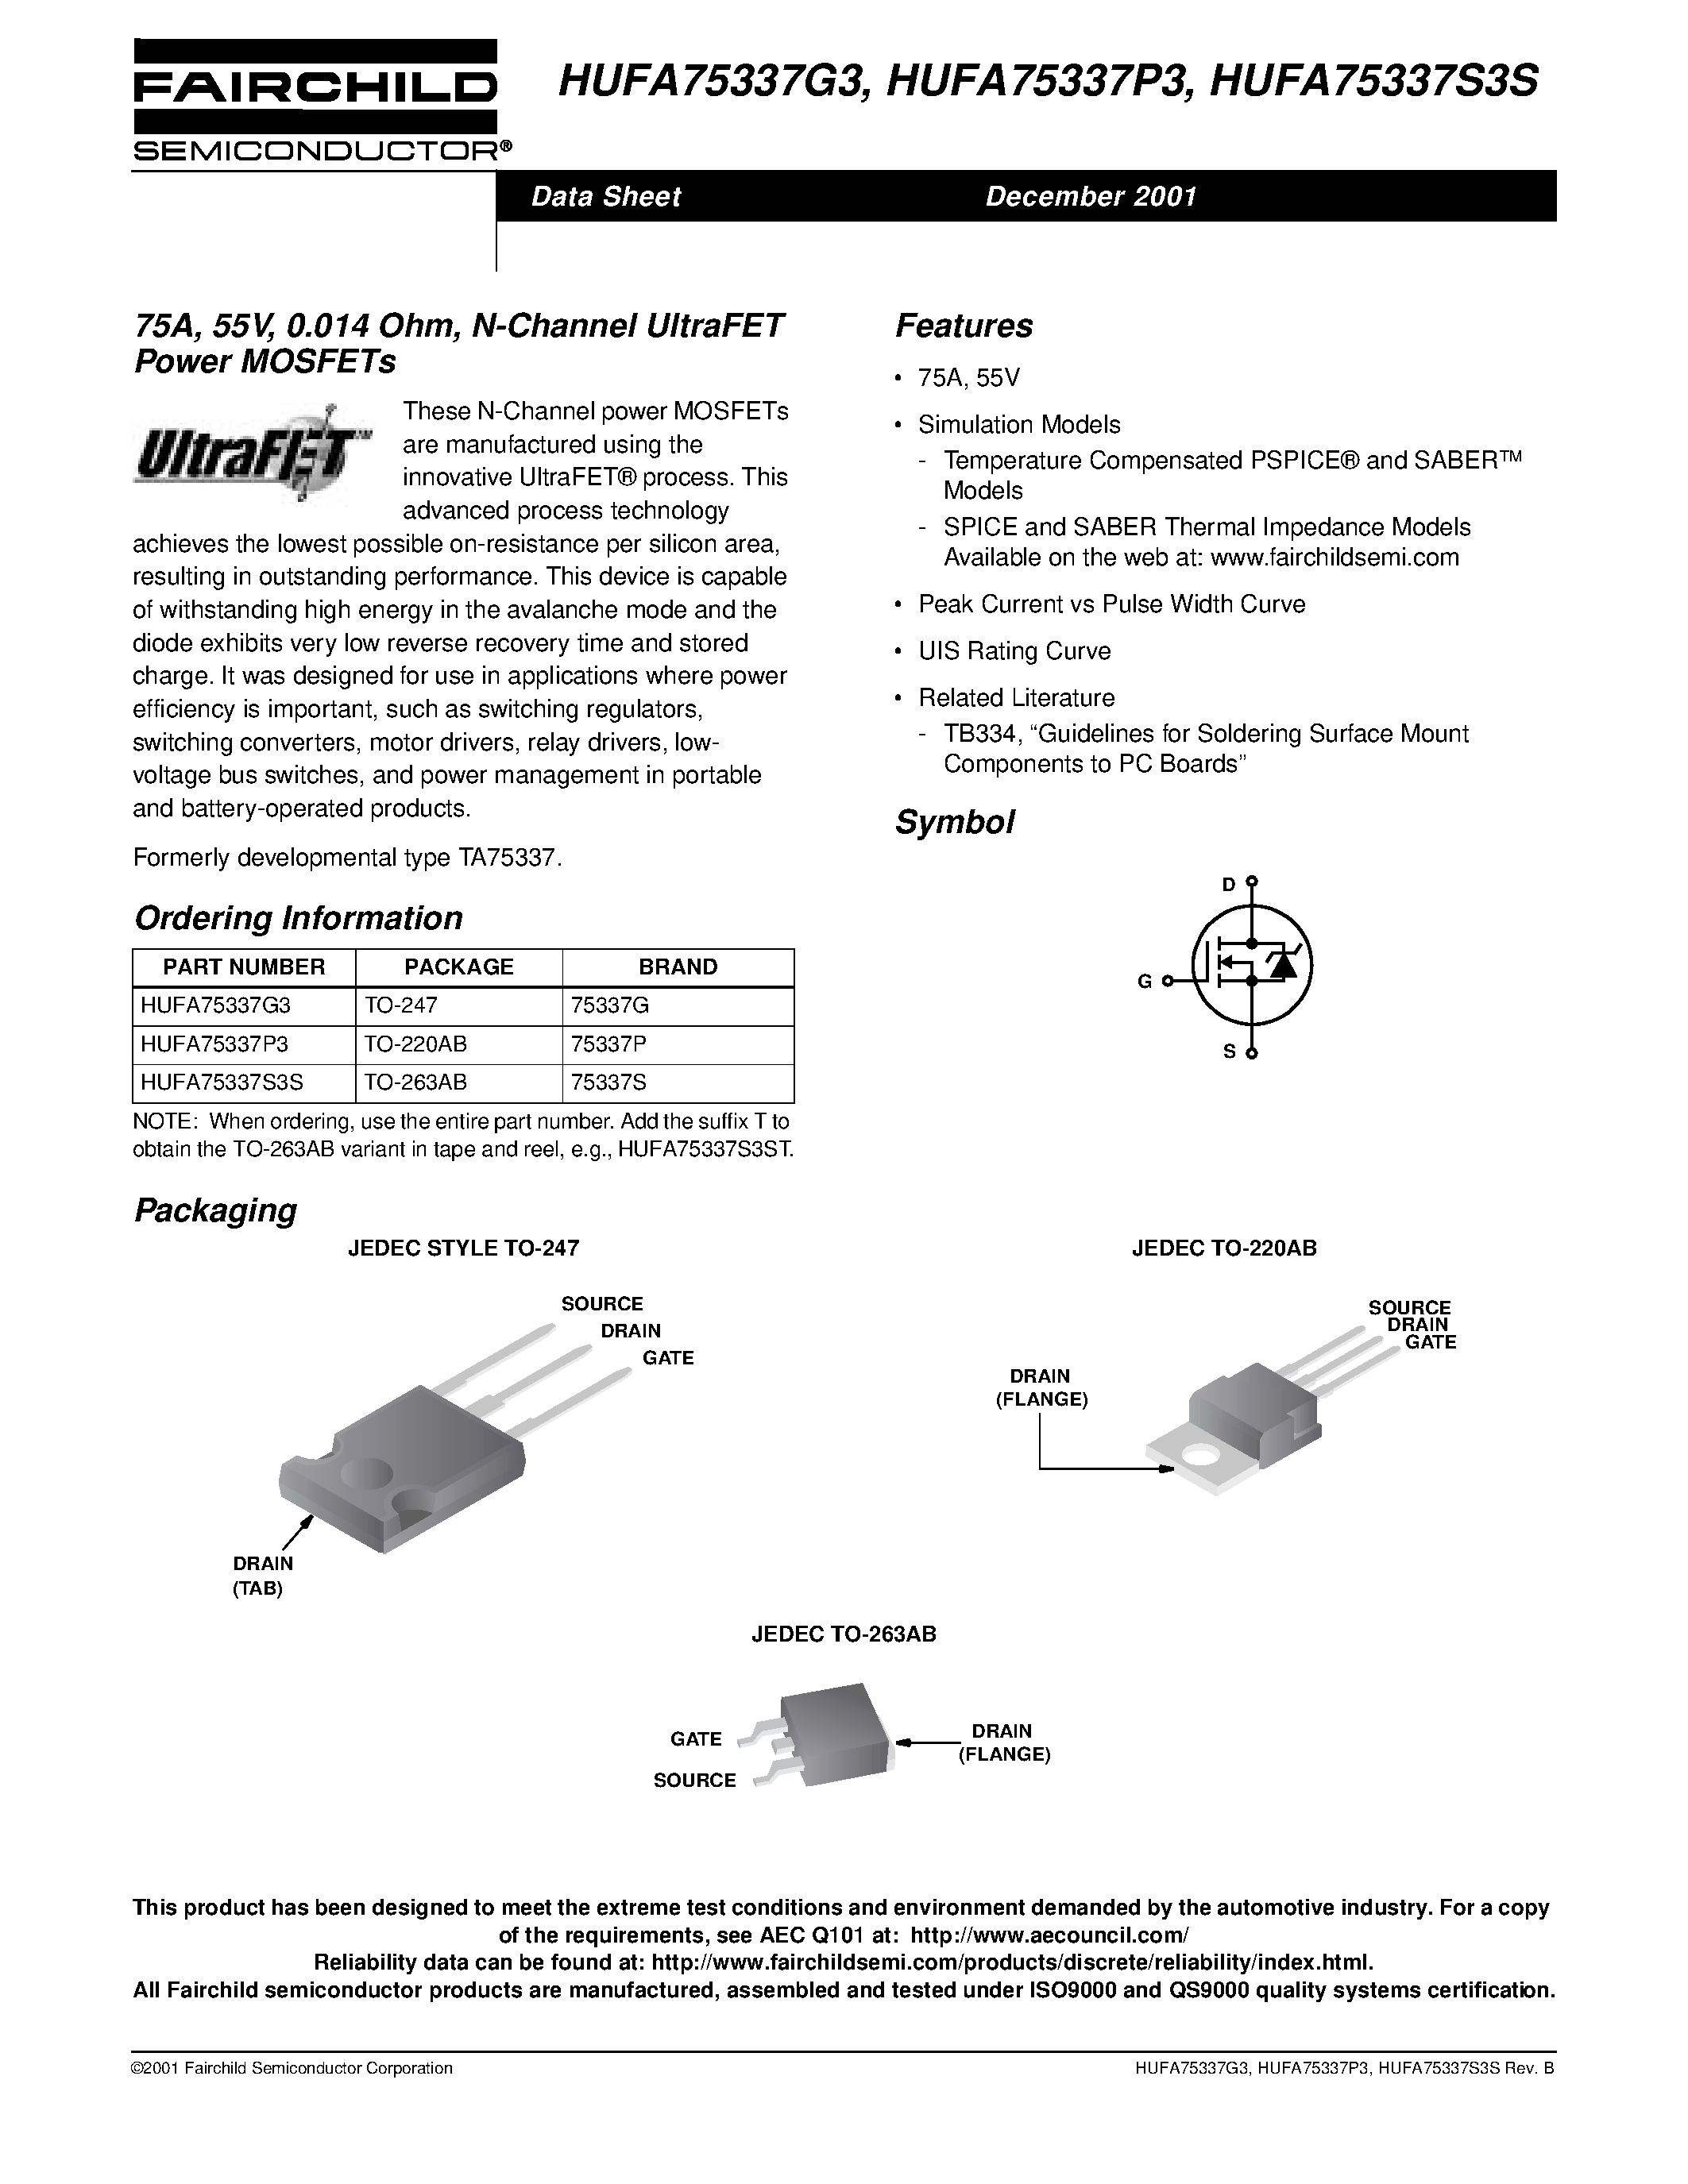 Datasheet HUFA75337S3S - 75A/ 55V/ 0.014 Ohm/ N-Channel UltraFET Power MOSFETs page 1